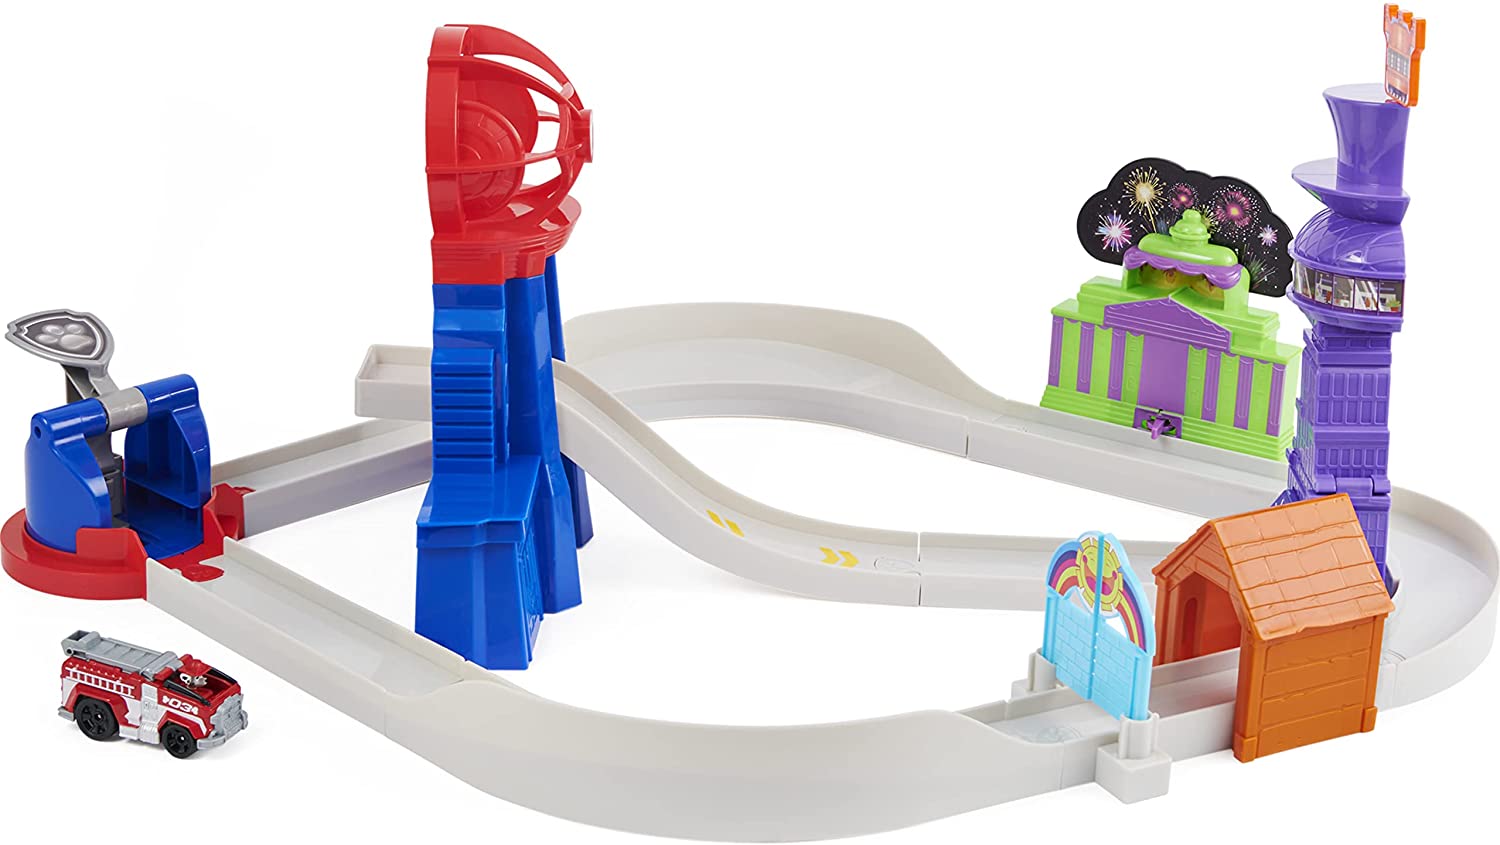 Paw Patrol True Metal Total City Track Playset w/ Marshall Vehicle $19.20 + Free Shipping w/ Prime or on $25+